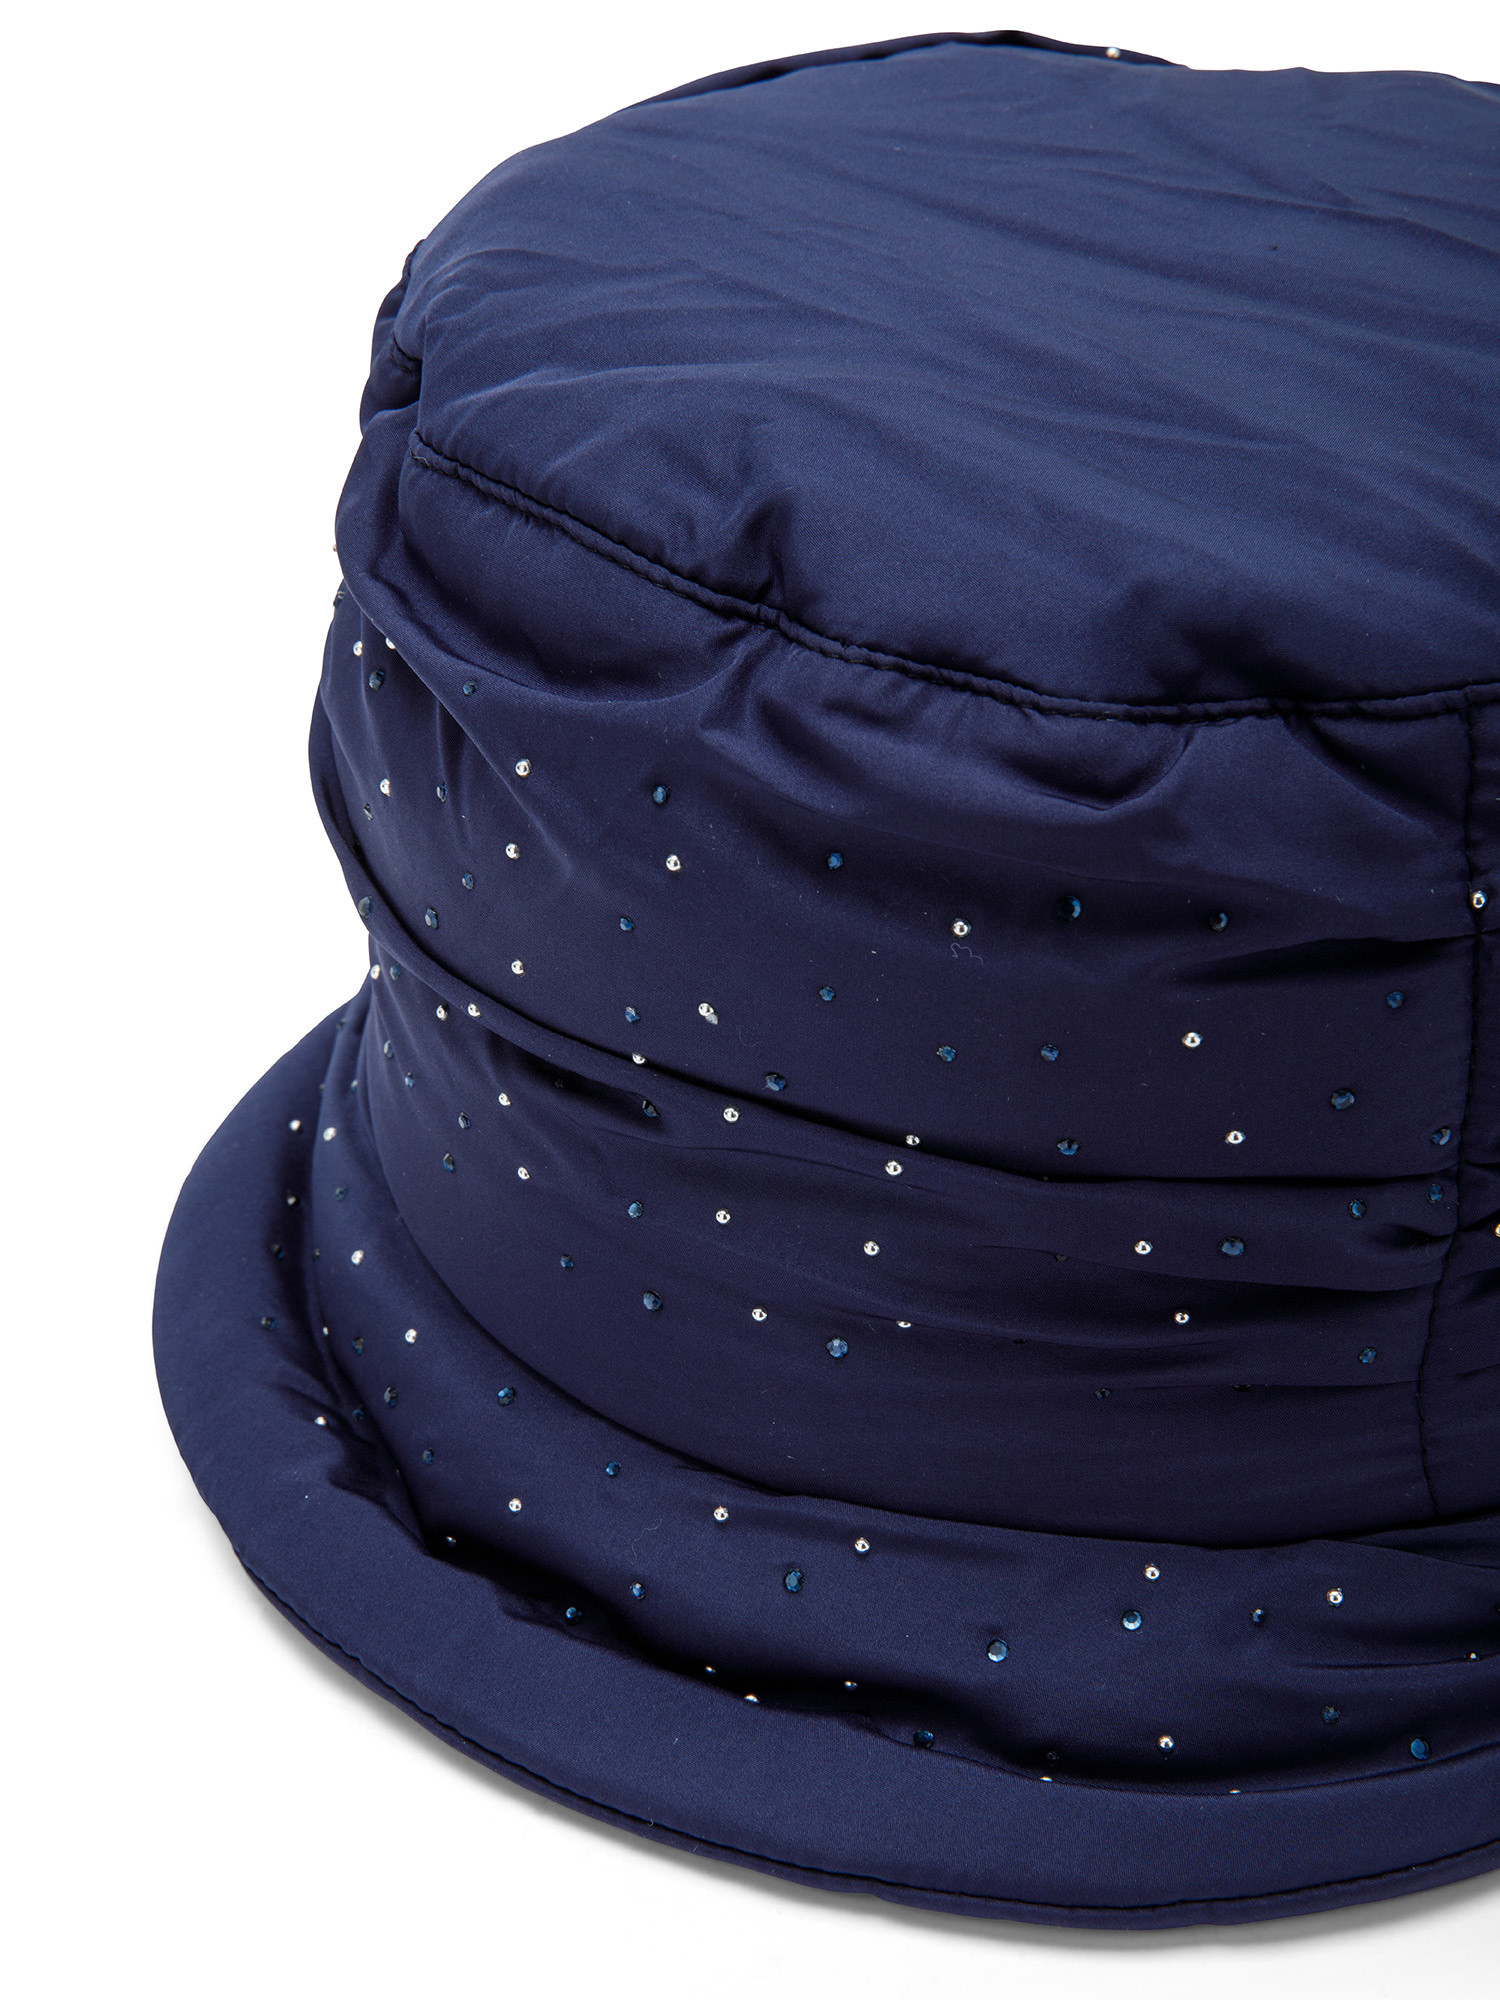 Koan - Cappello con strass, Blu, large image number 1